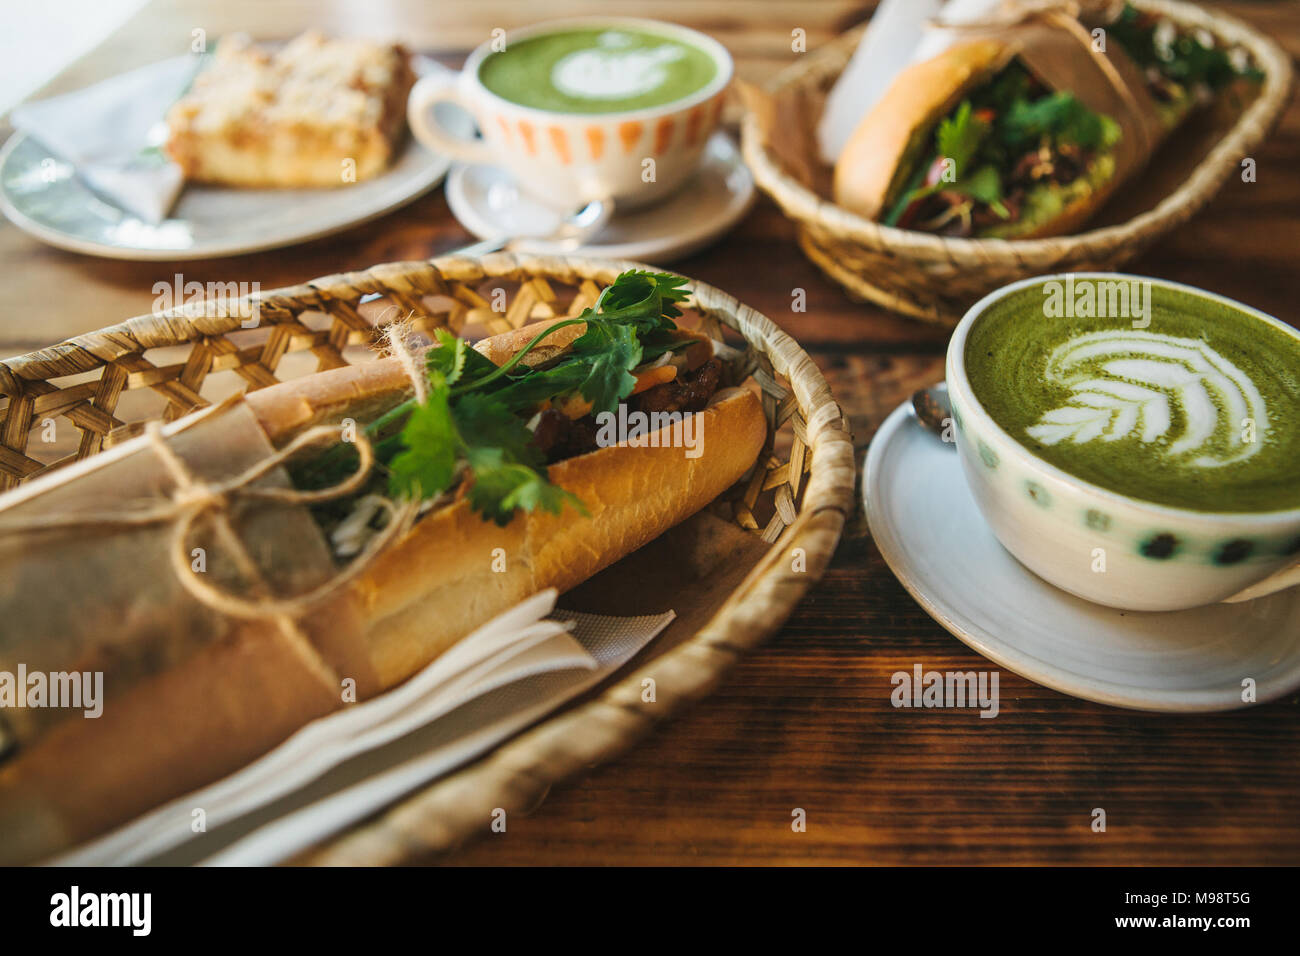 Healthy breakfast: cup of green tea with milk called Matcha, dessert and sandwiches with vegetables and herbs on wooden table Stock Photo